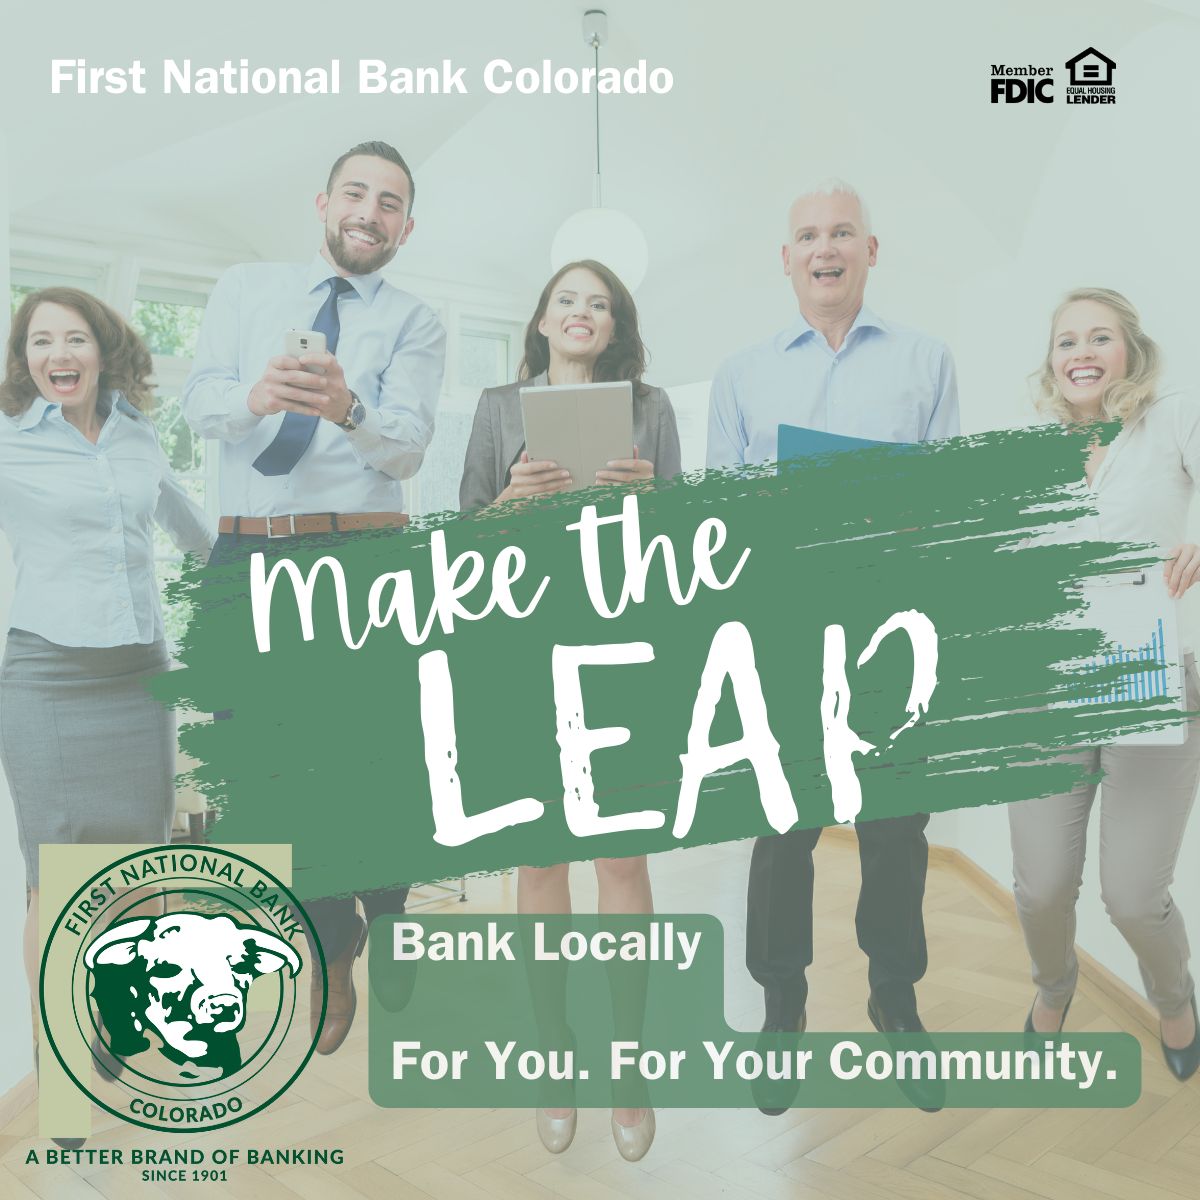 First National Bank Colorado on LinkedIn: #banklocally #leapday